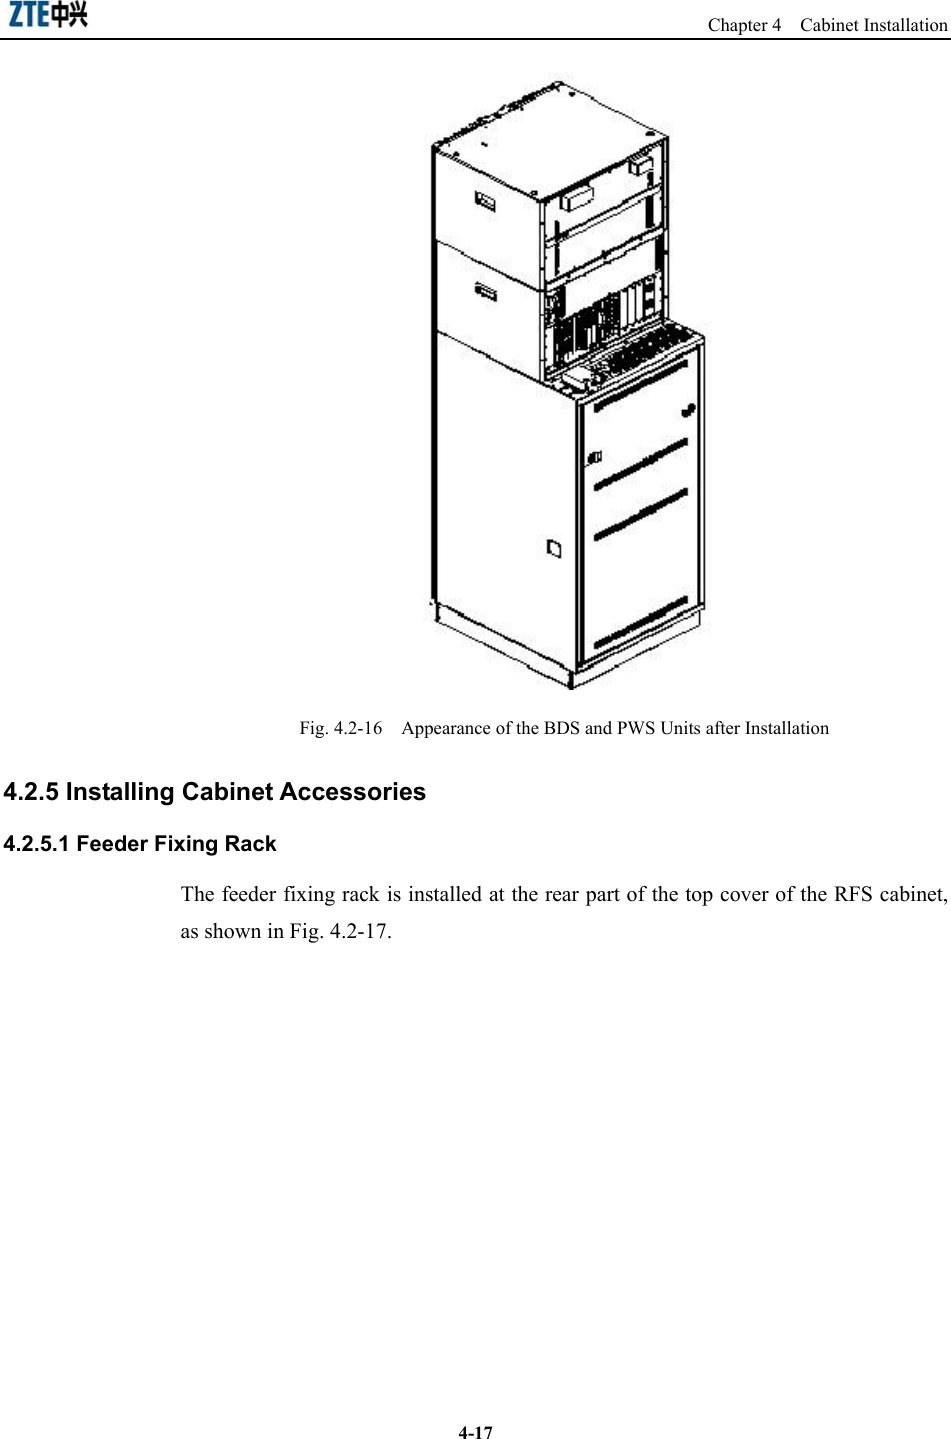                                                                   Chapter 4  Cabinet Installation  4-17 Fig. 4.2-16    Appearance of the BDS and PWS Units after Installation 4.2.5 Installing Cabinet Accessories 4.2.5.1 Feeder Fixing Rack The feeder fixing rack is installed at the rear part of the top cover of the RFS cabinet, as shown in Fig. 4.2-17.   